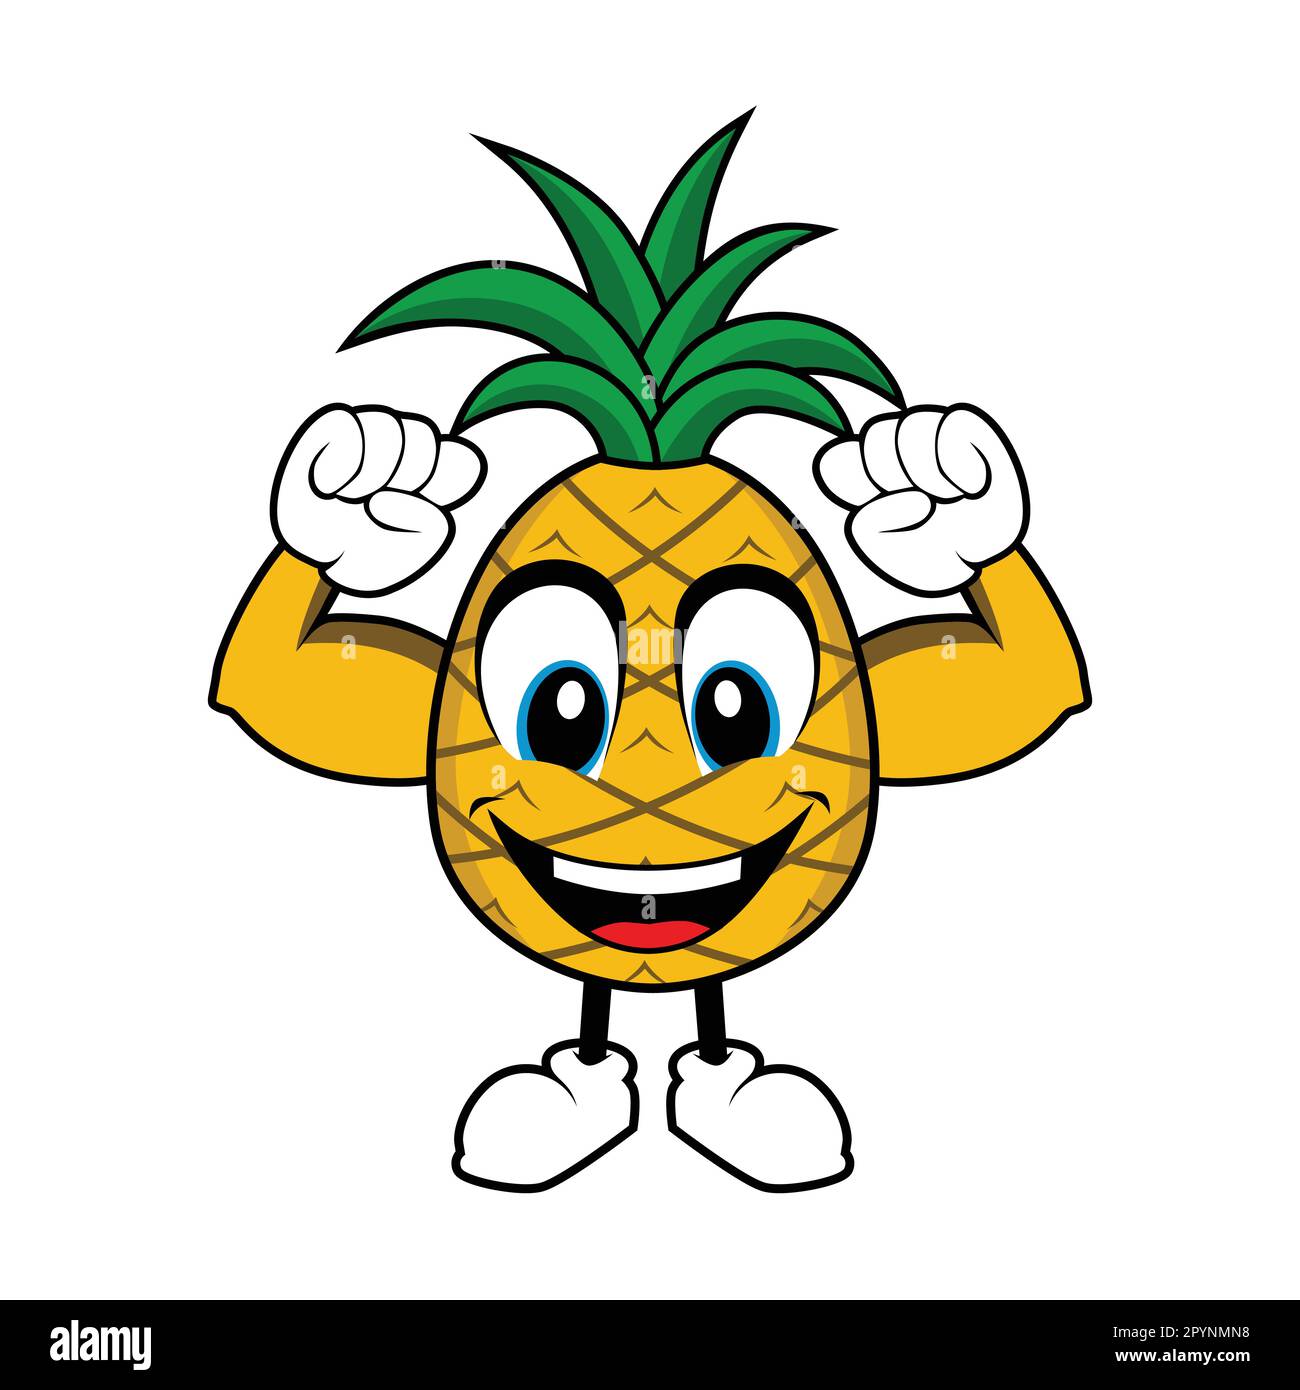 Pineapple Fruit Mascot Cartoon with Muscle Arms Stock Vector